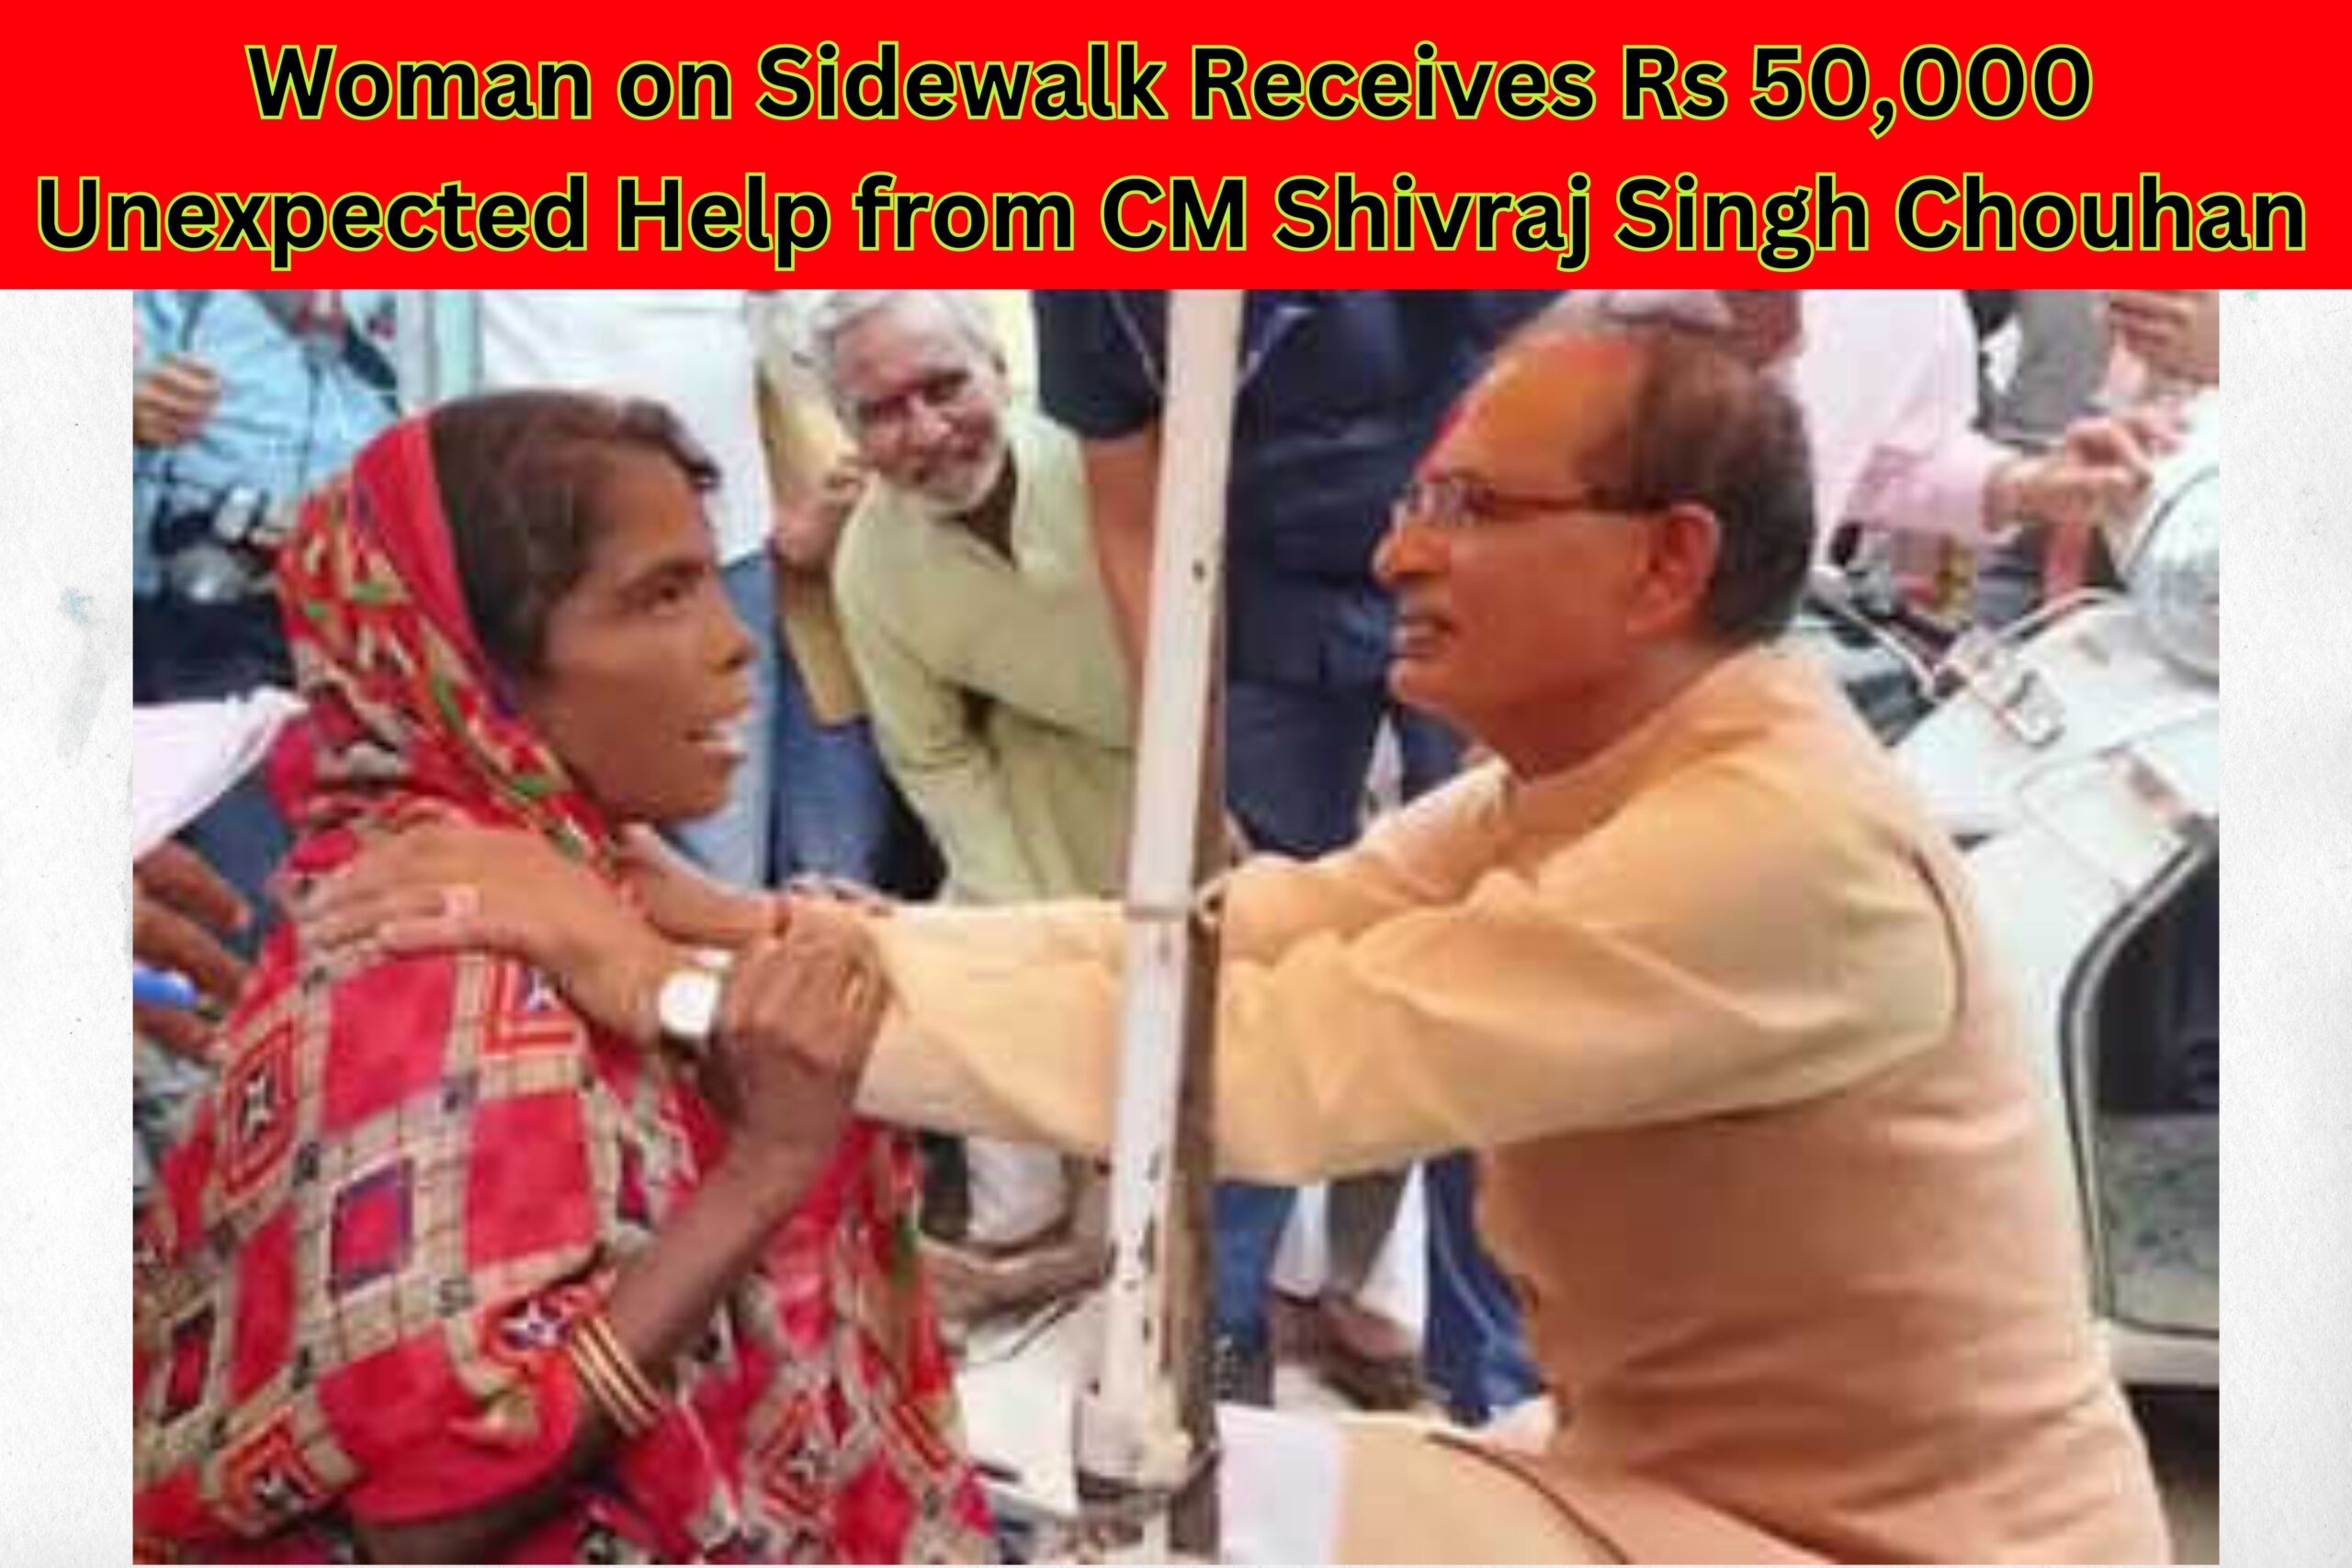 CM Shivraj Singh Chouhan's Kindness Inspires Others to Help Those in Need